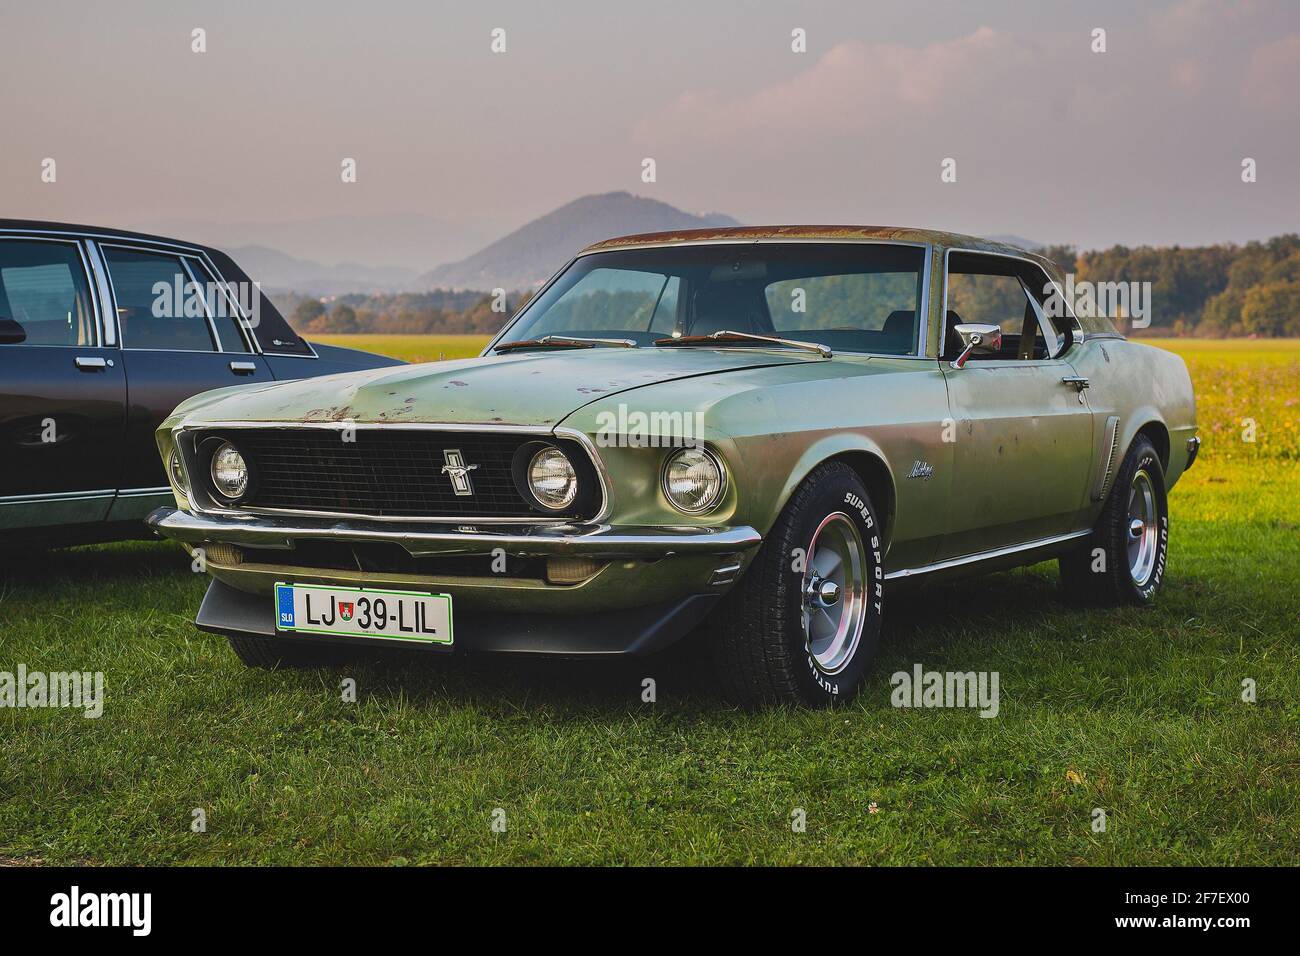 LEVEC, SLOVENIA, 20. OCTOBER 2018: vintage 1969 mustang in green color with serious patina, rat looking vintage muscle car with some rust on it. Stock Photo